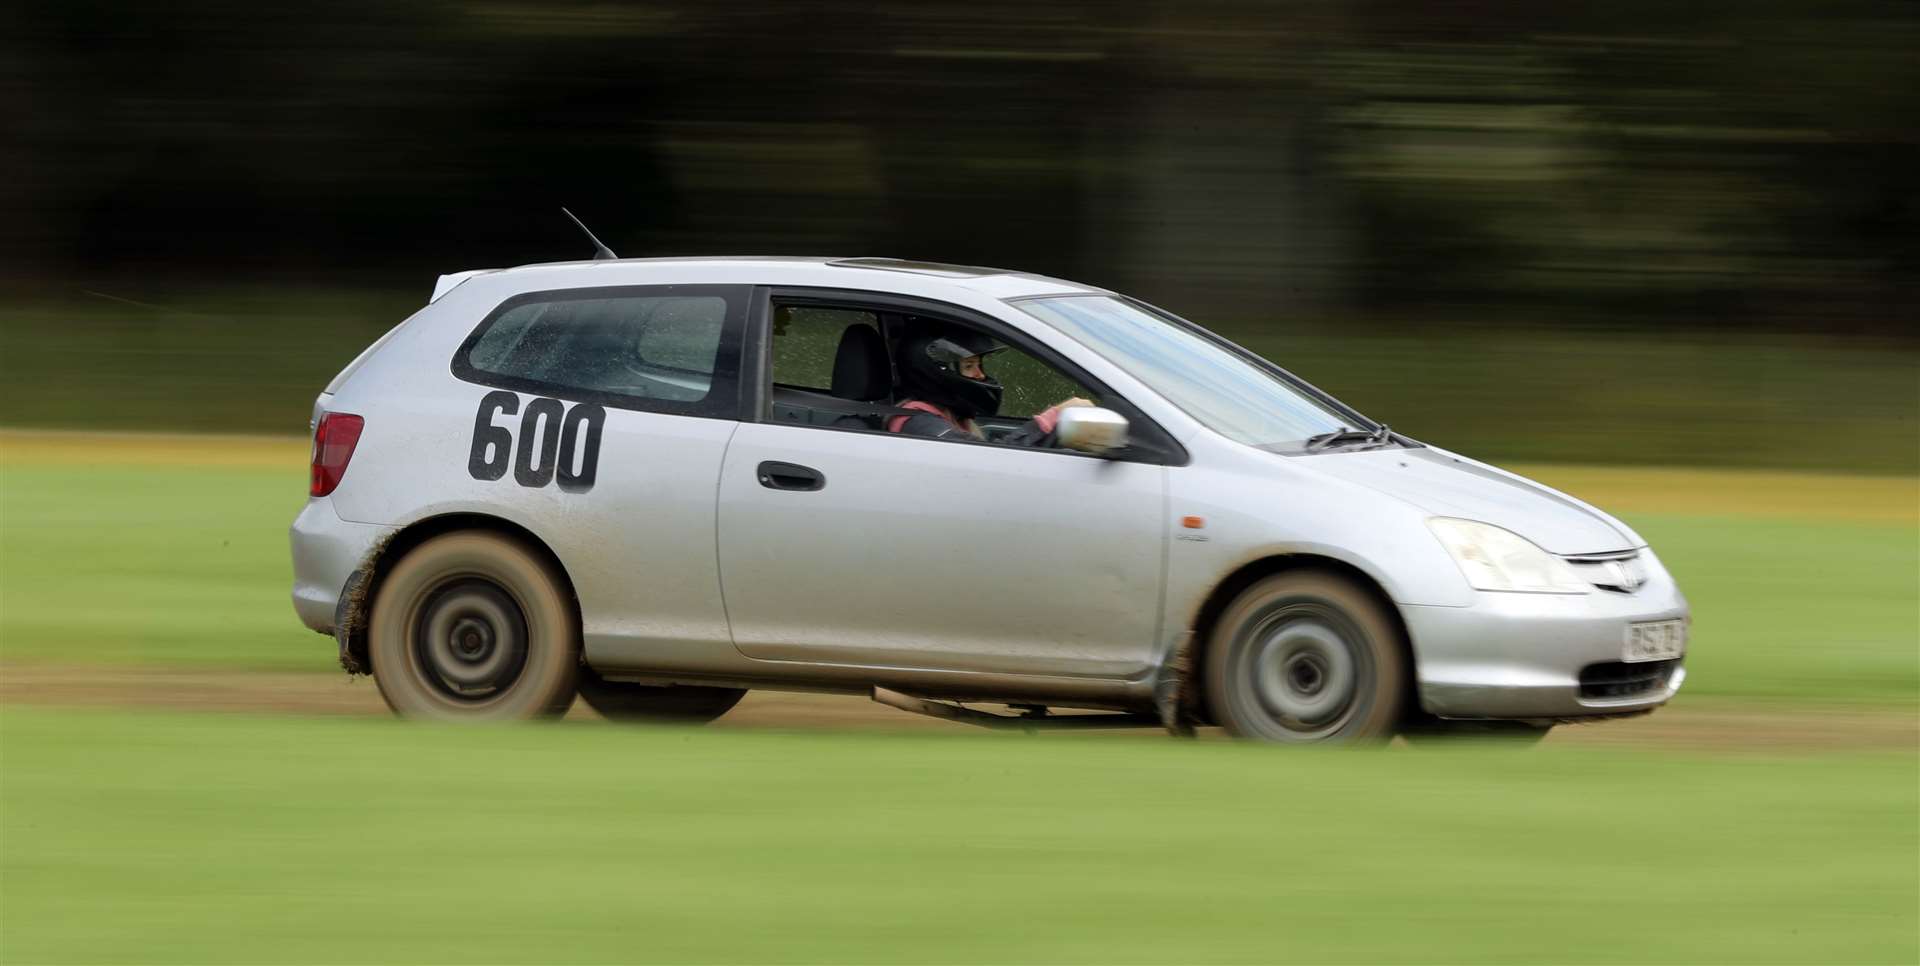 Terri Munro (Honda Civic) won the ladies' section in class nine in the latest autocross race day. James is using the panning technique here to convey the sense of movement. Picture: James Gunn